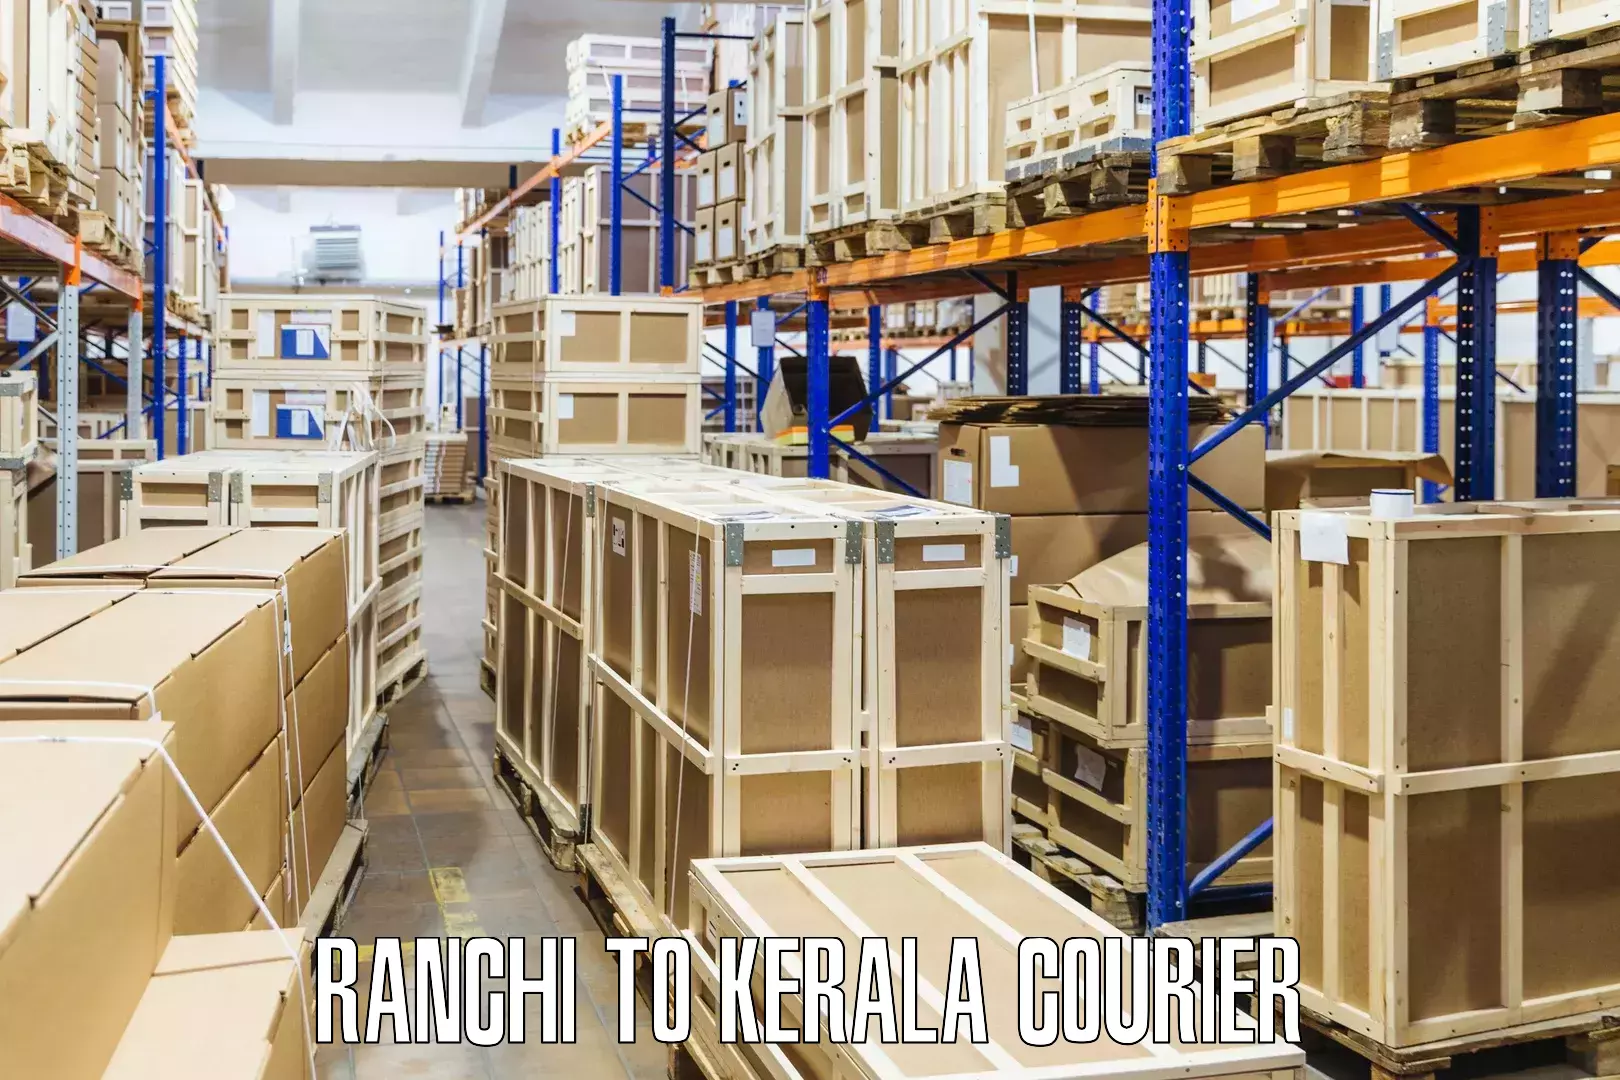 Express delivery network Ranchi to Guruvayur